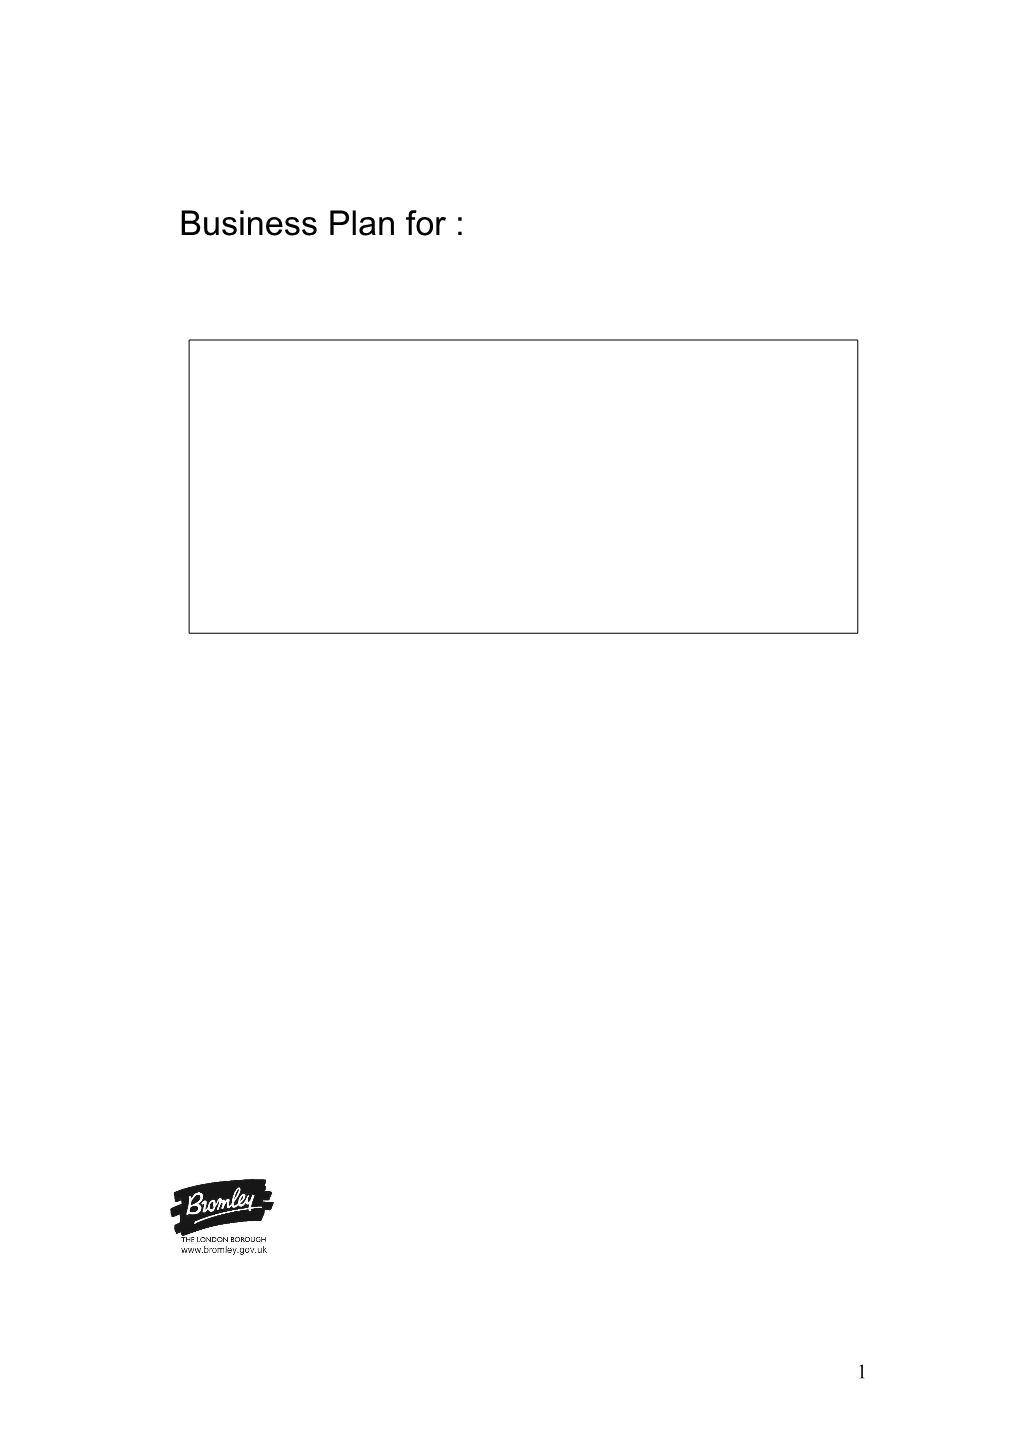 Business Plan for